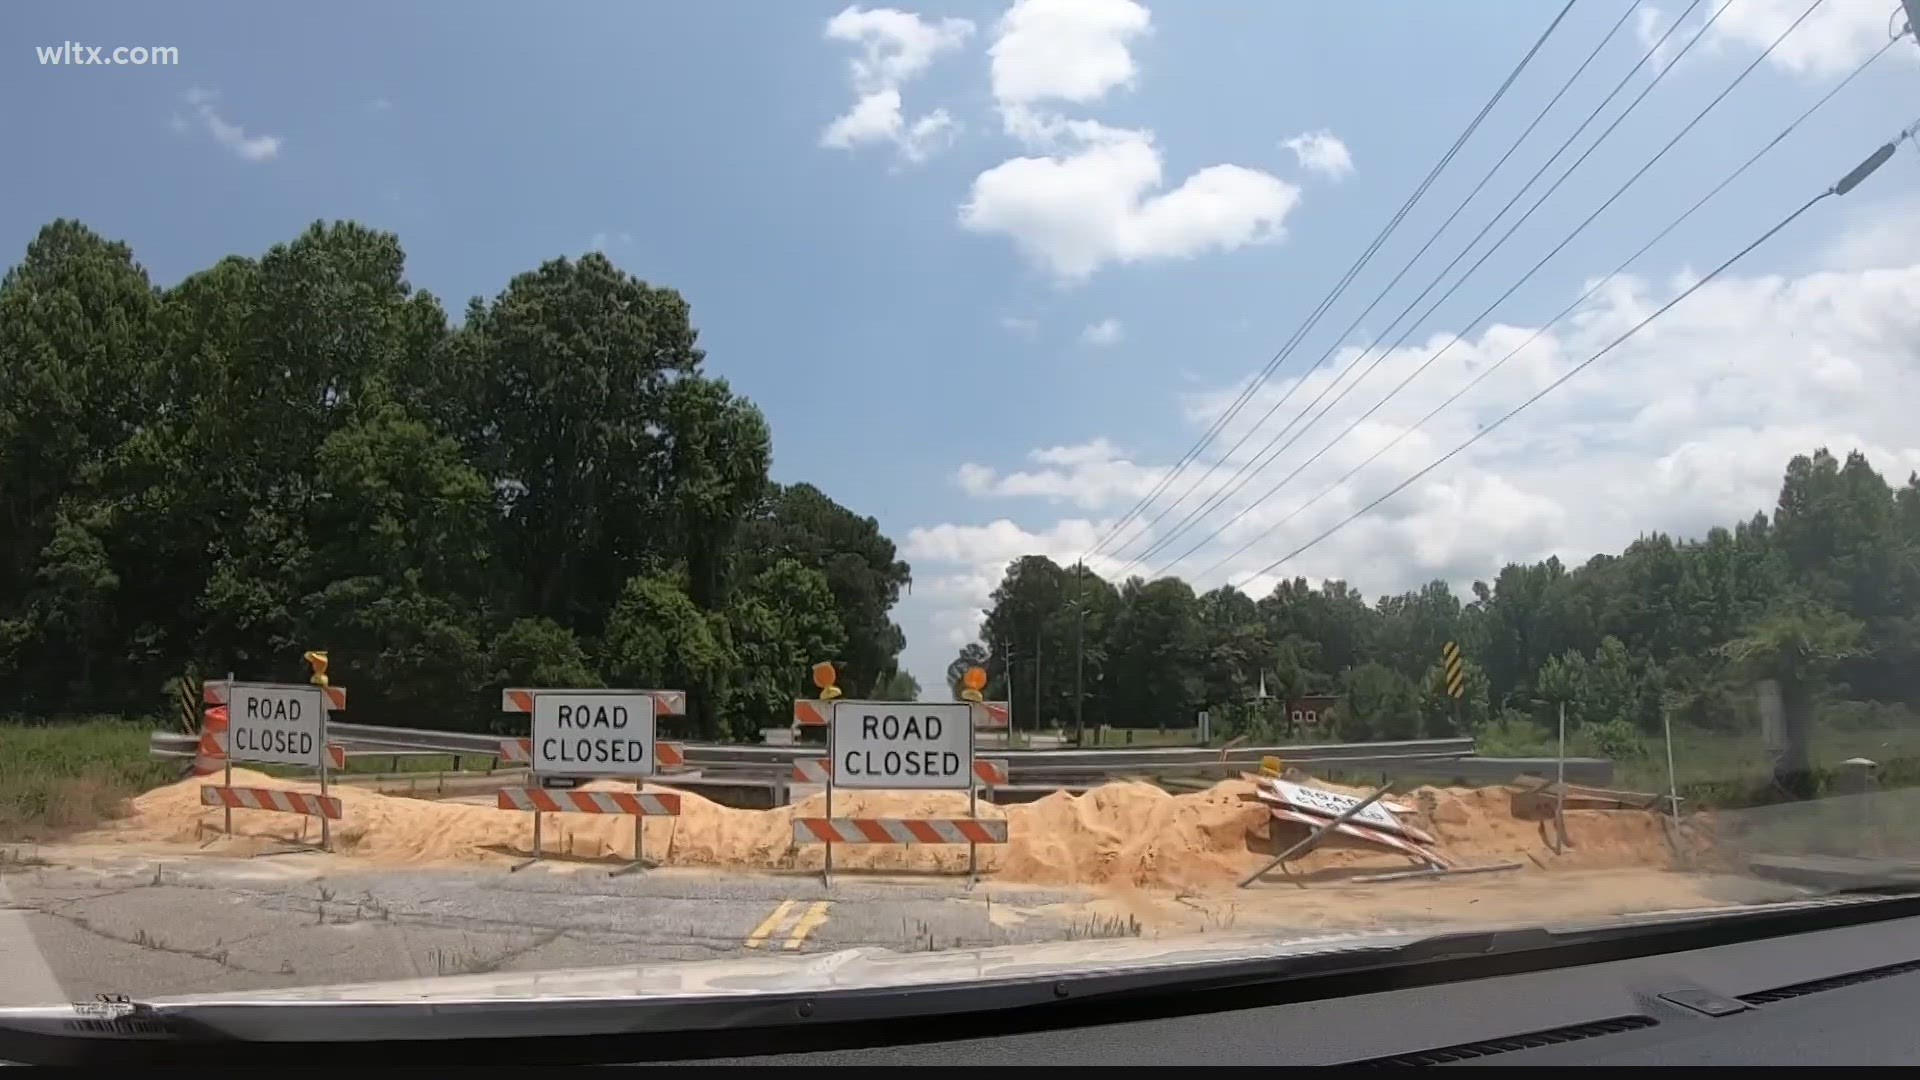 The road has been closed for almost a year and residents who live nearby are growing tired of the detour.